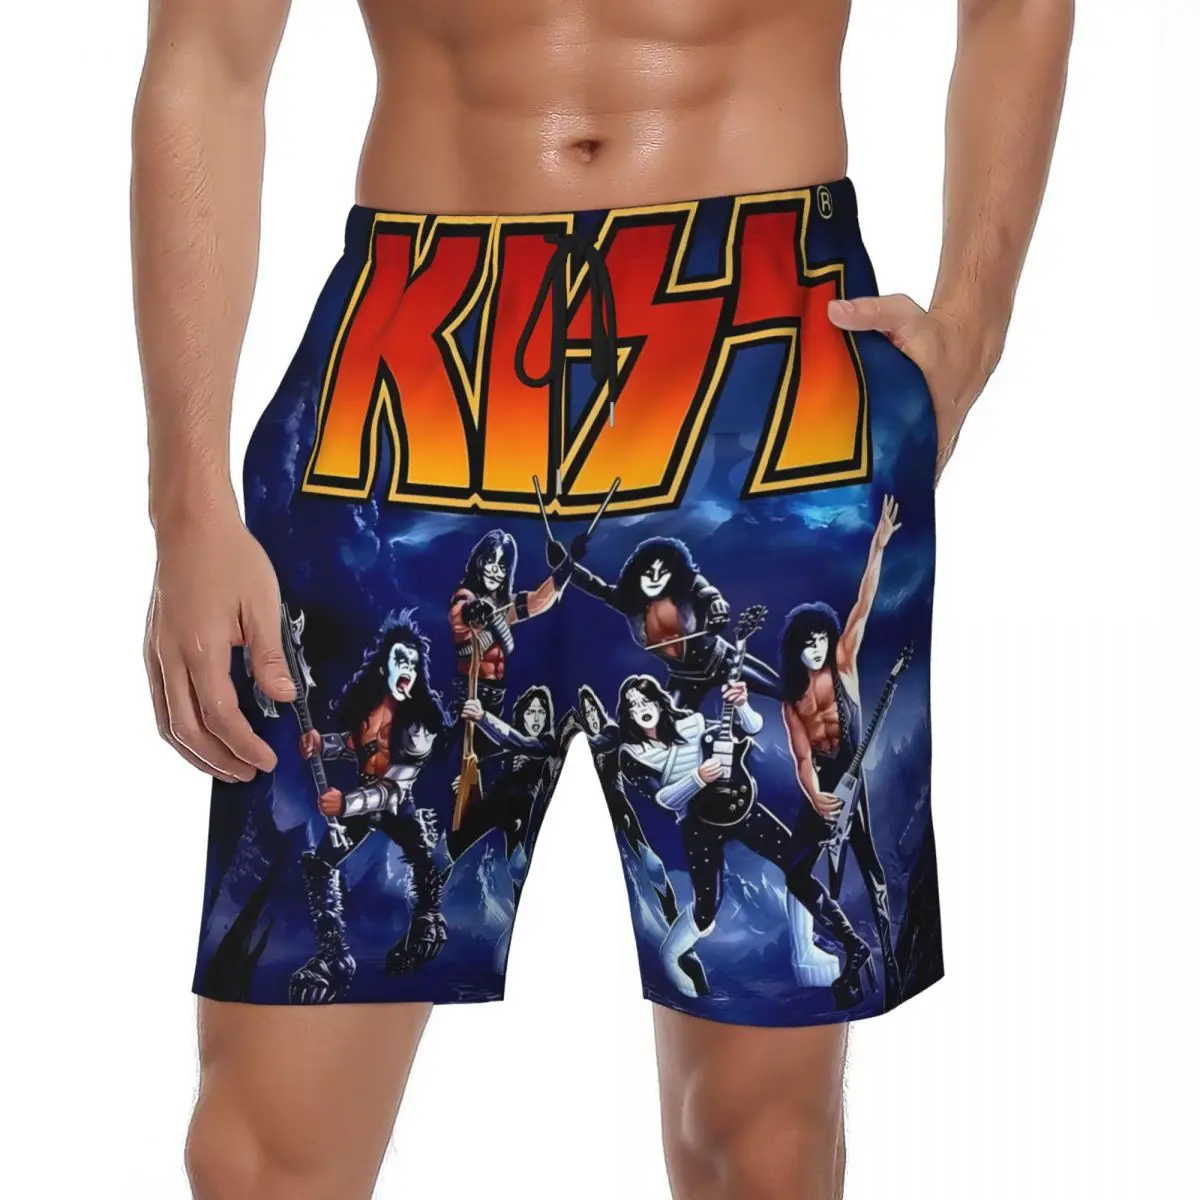 

3d Print Kiss Band Board Shorts Summer Music Cool Sportswear Board Short Pants Males Quick Dry Casual Plus Size Beach Trunks